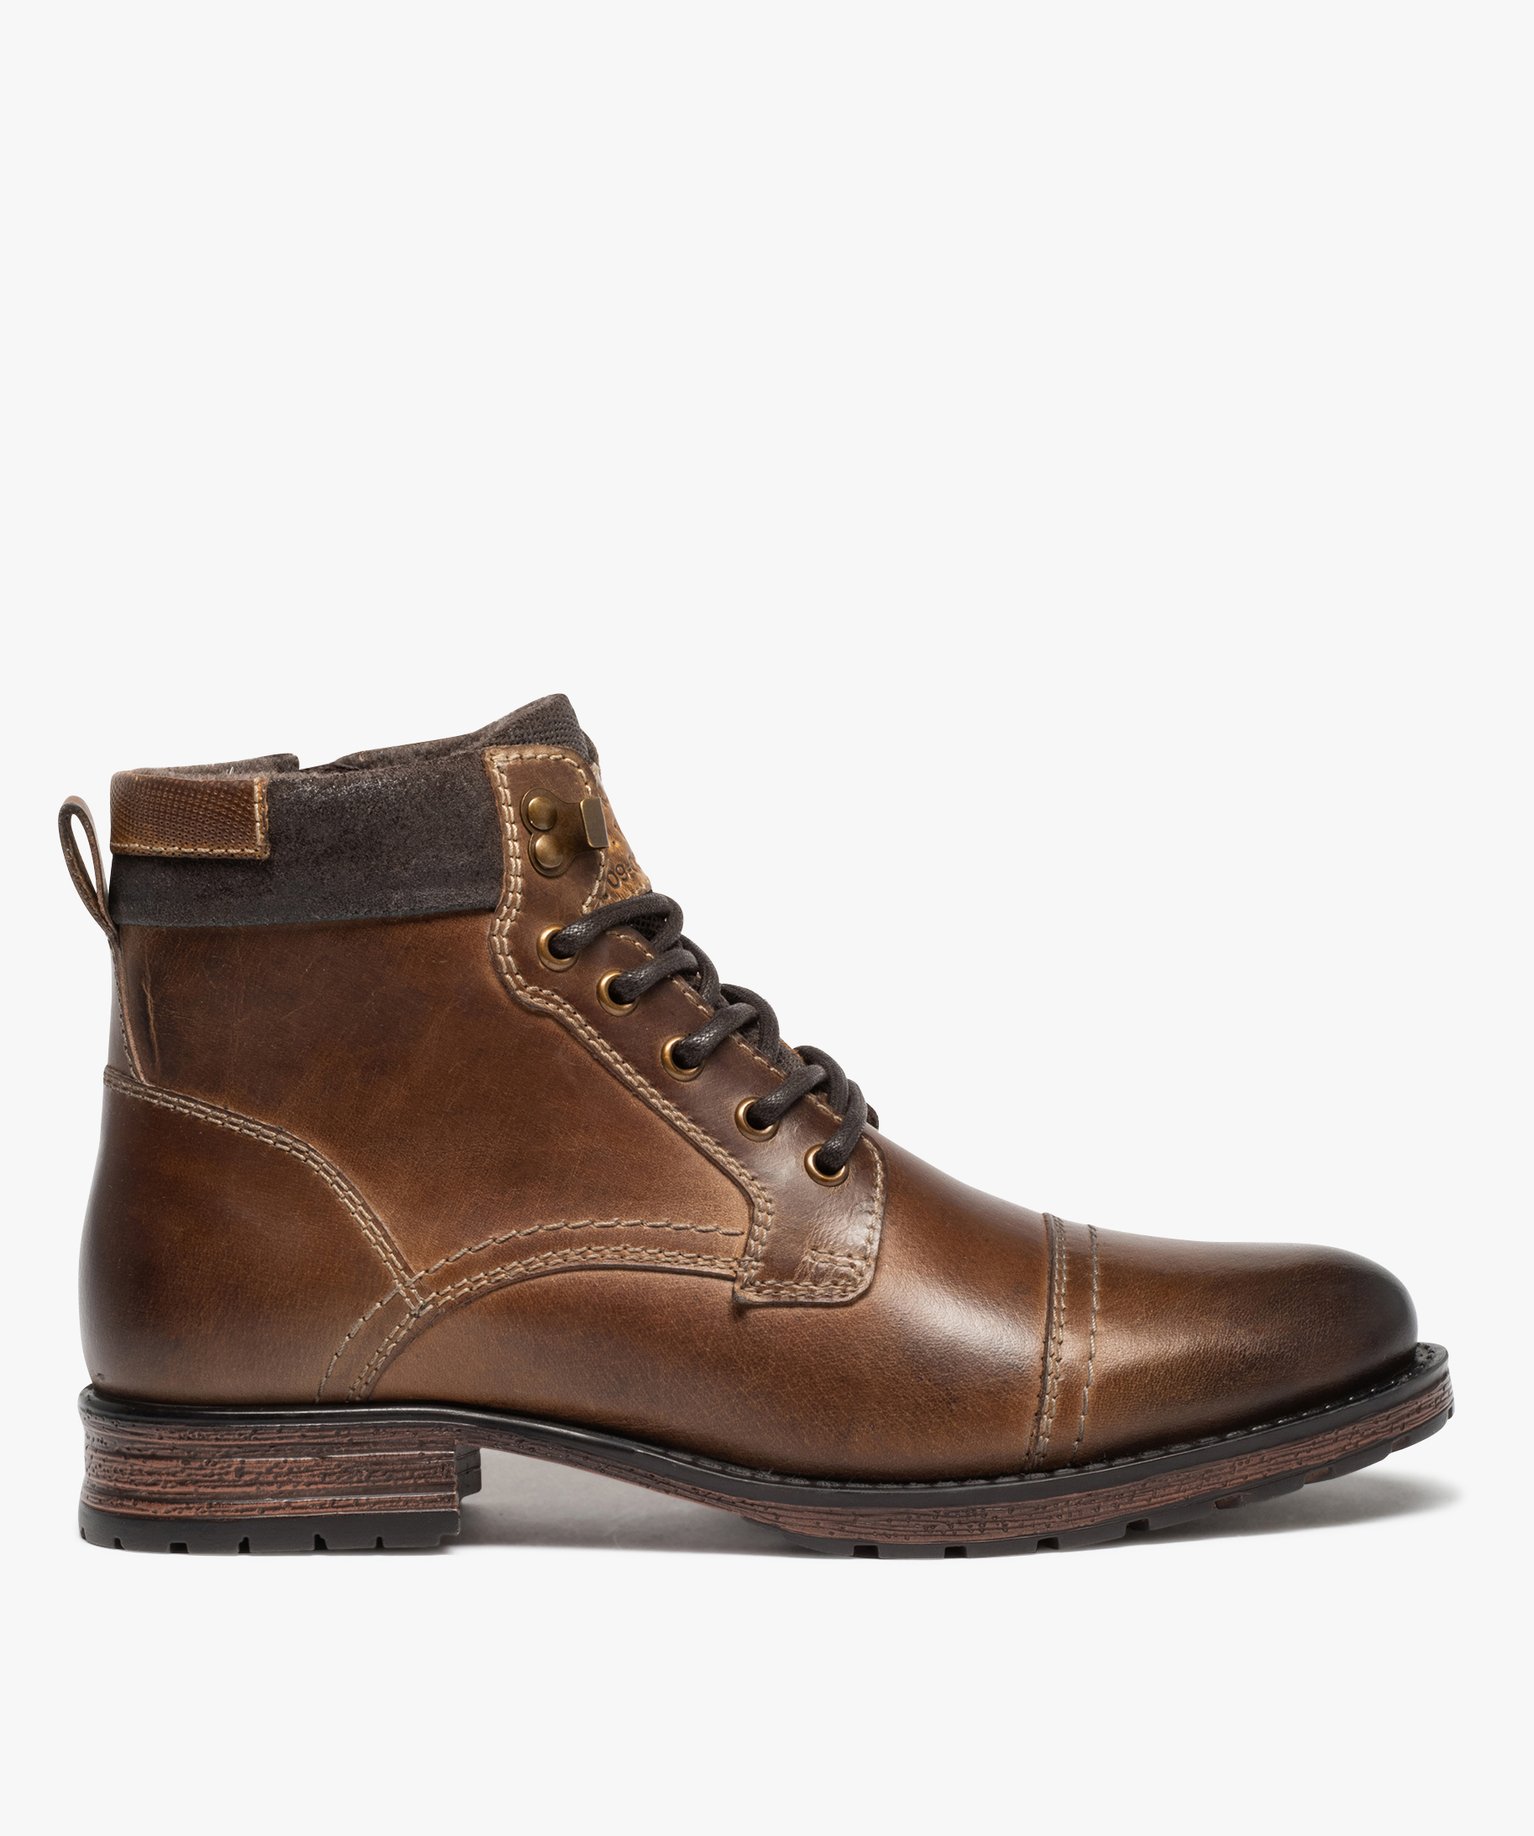 boots homme a col rembourre dessus cuir - taneo brun